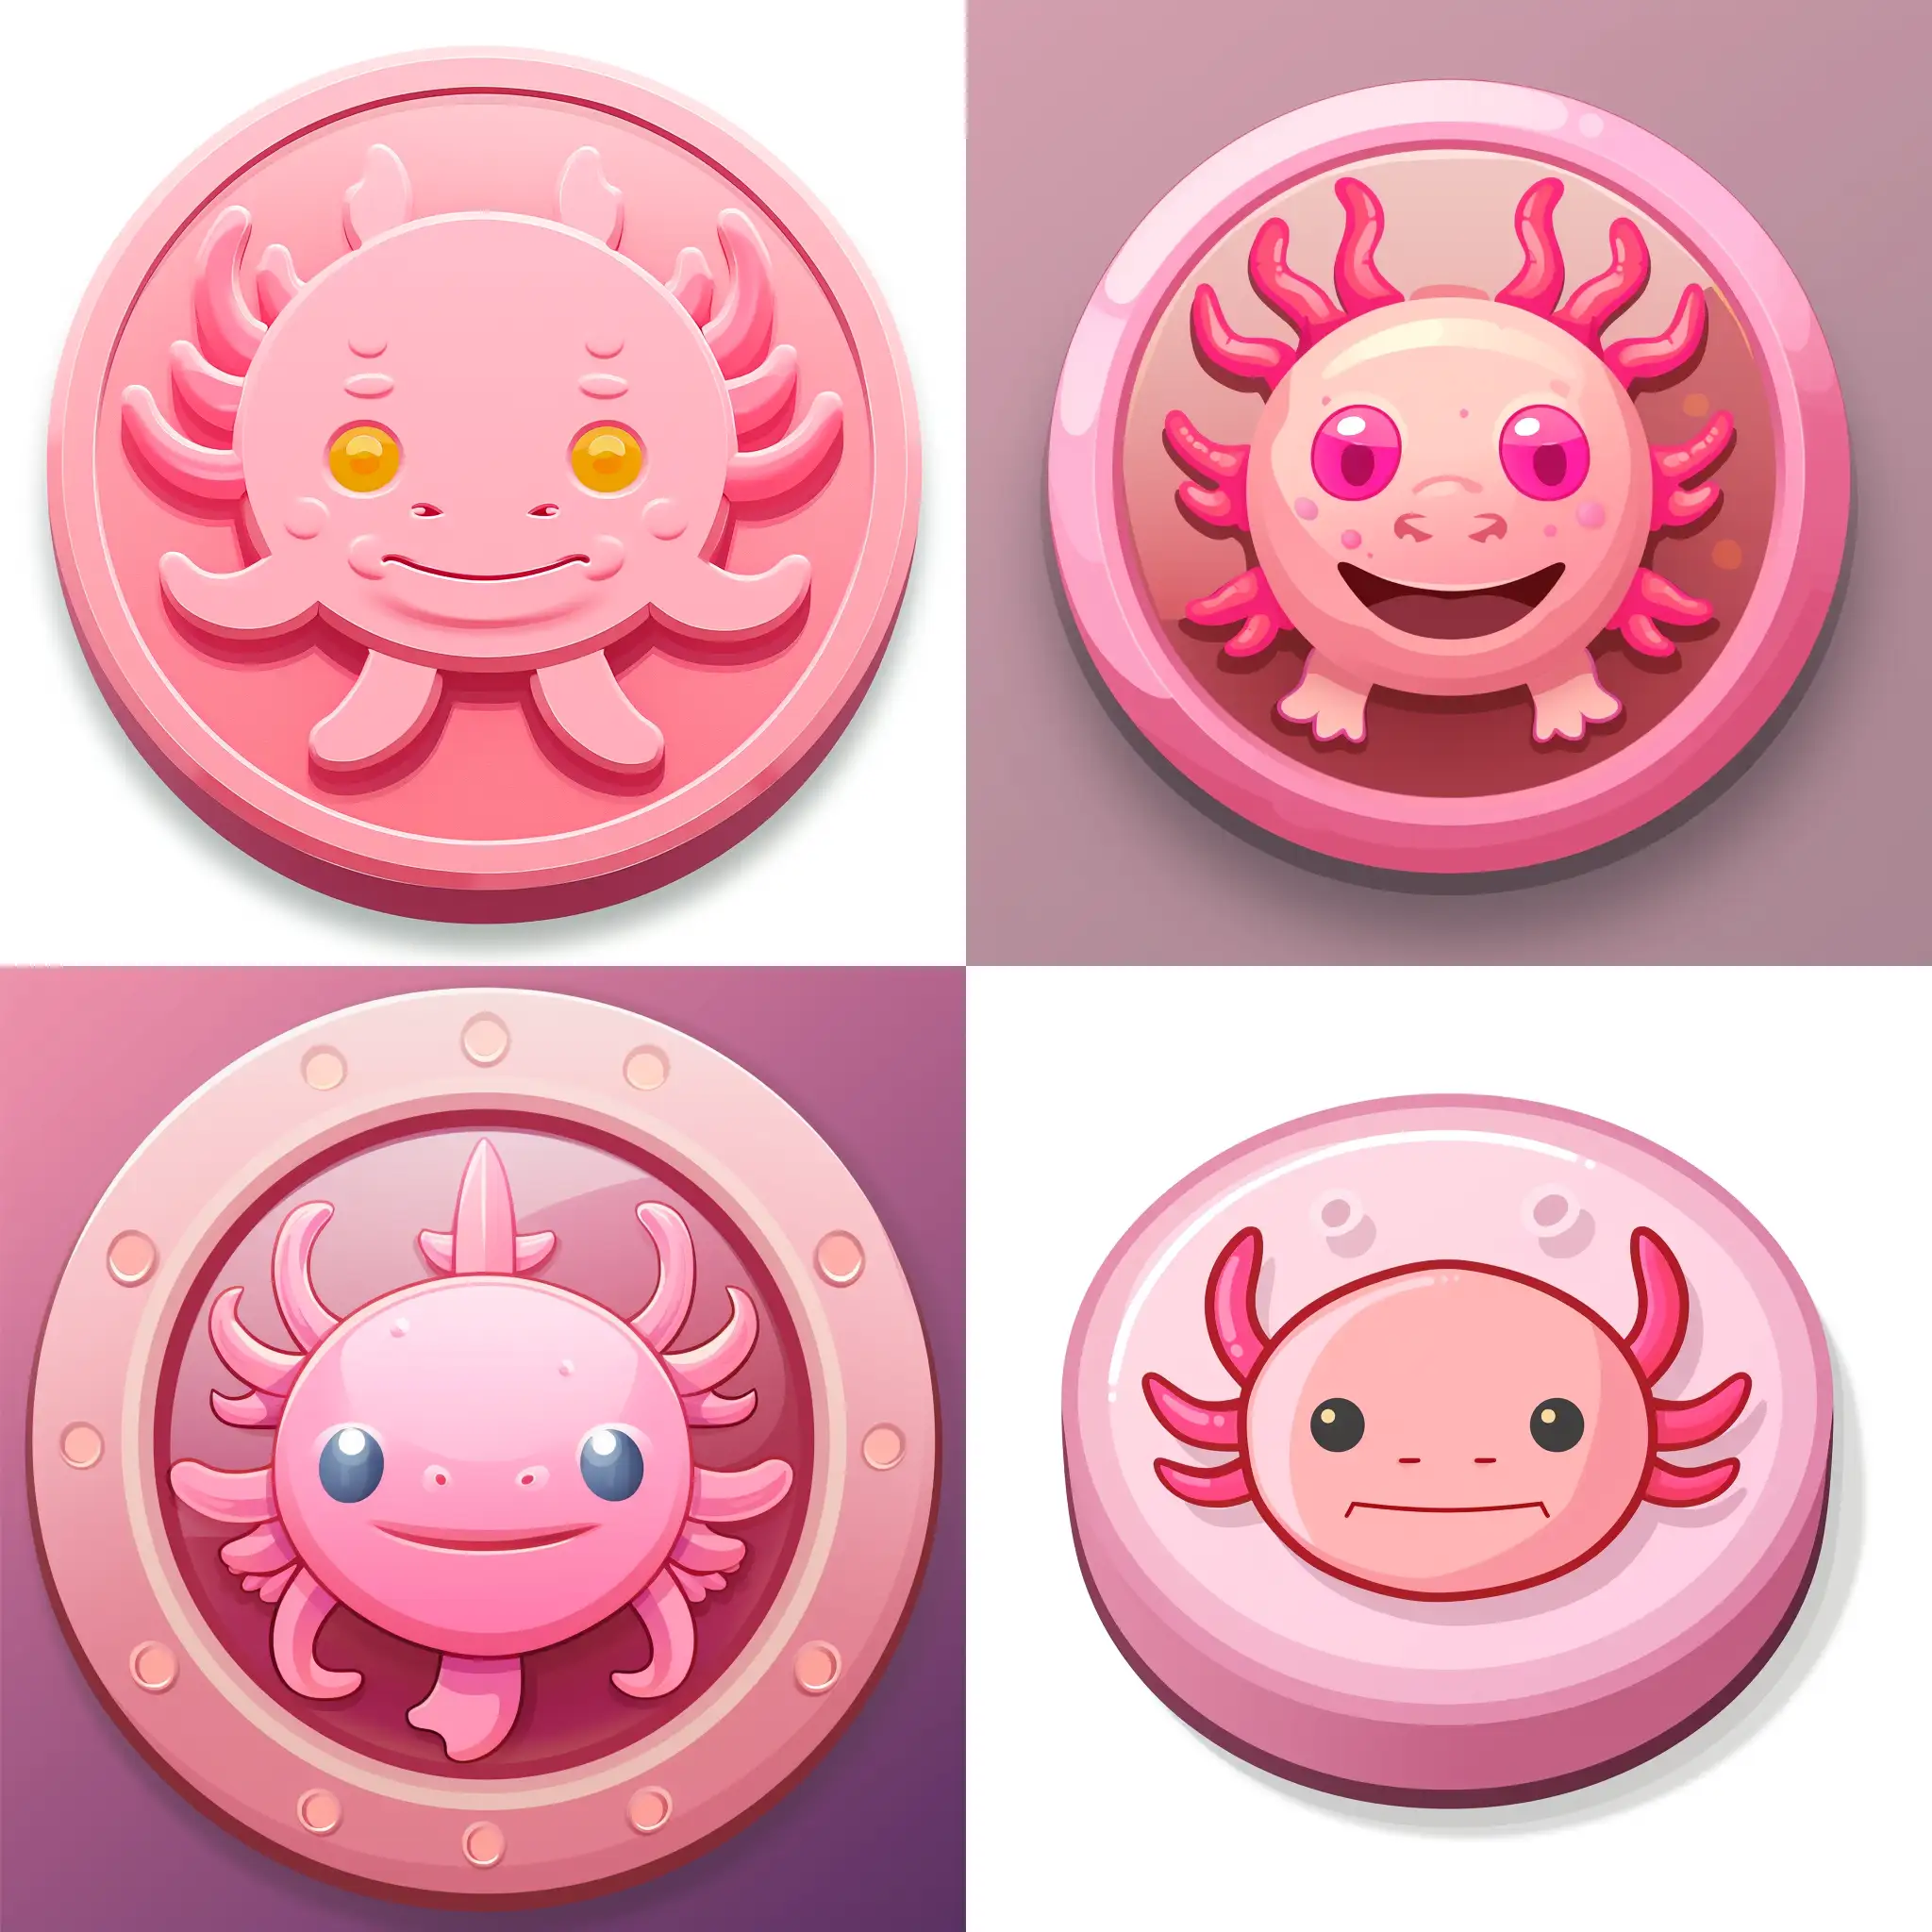 Pink coins icon with the face of axolotl from minecraft